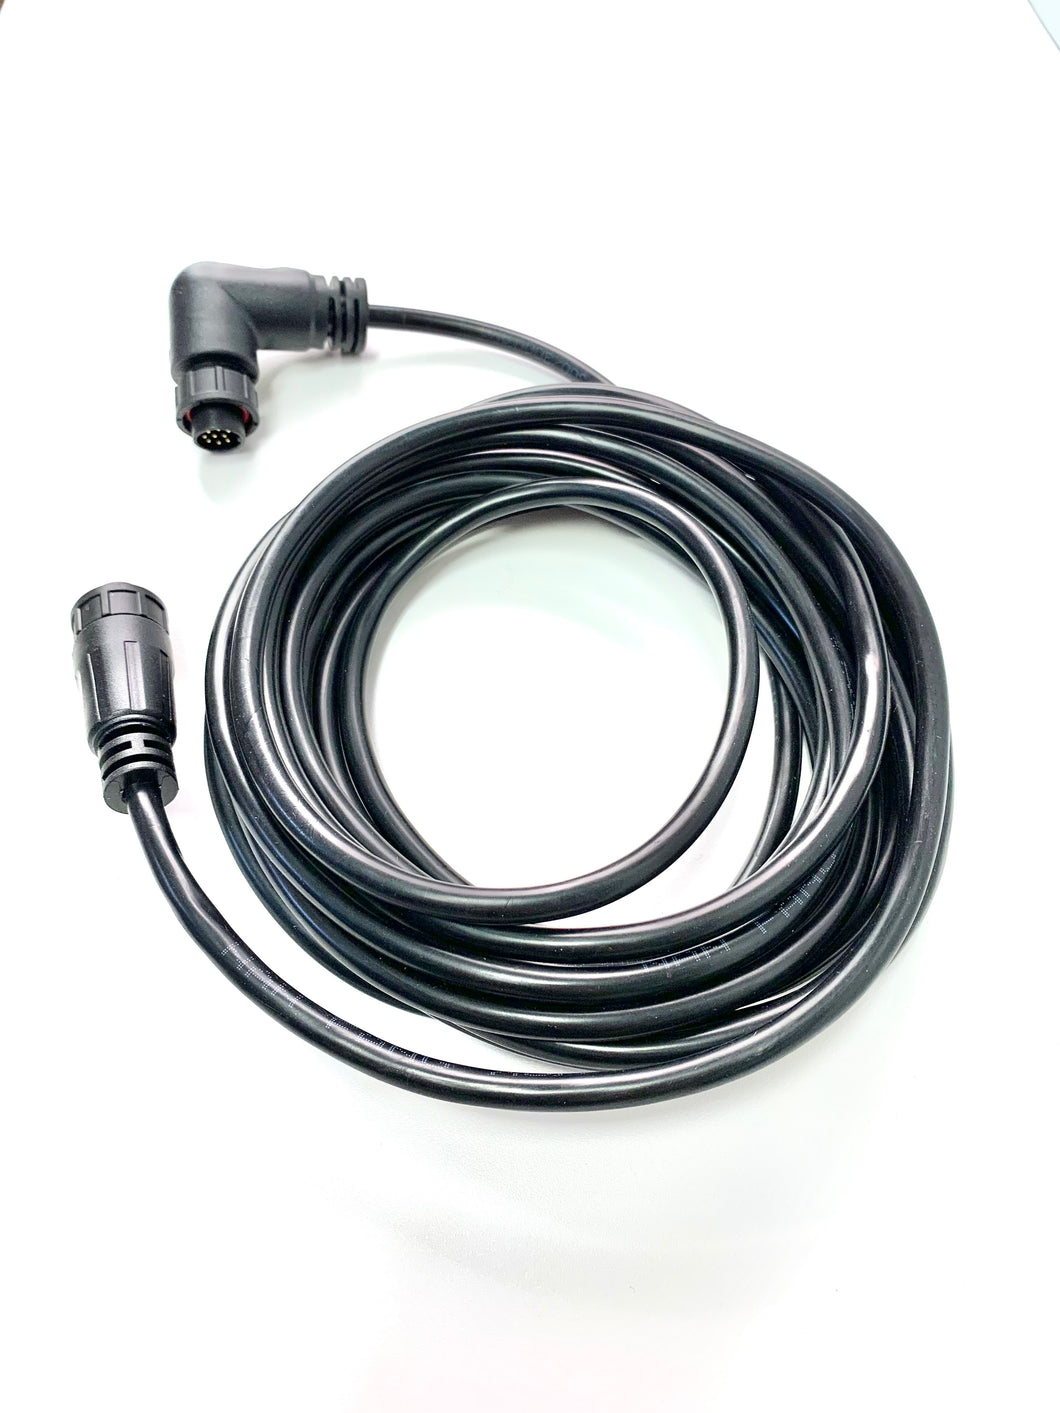 Replacement Data Cable for Connecting the Control Head to the Motor Drive - Twenty Foot (20') - In stock